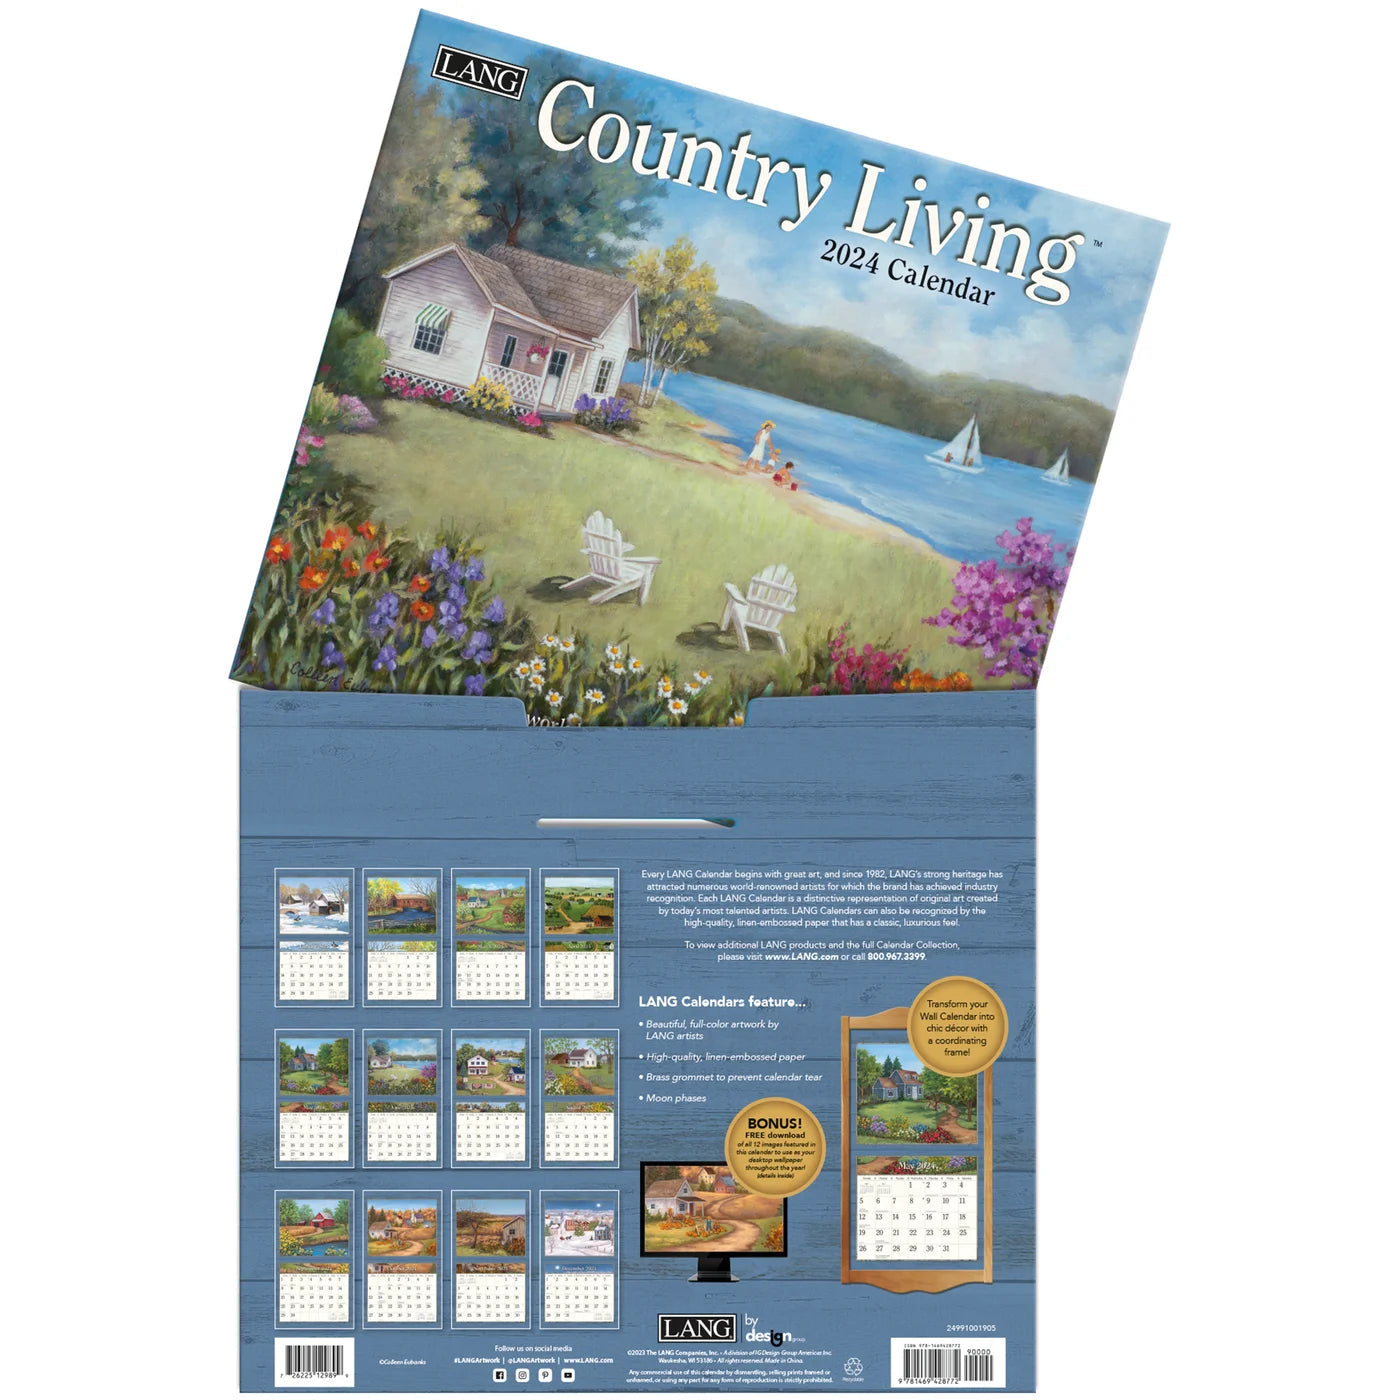 2024 LANG Country Living By Colleen Eubanks - Deluxe Wall Calendar